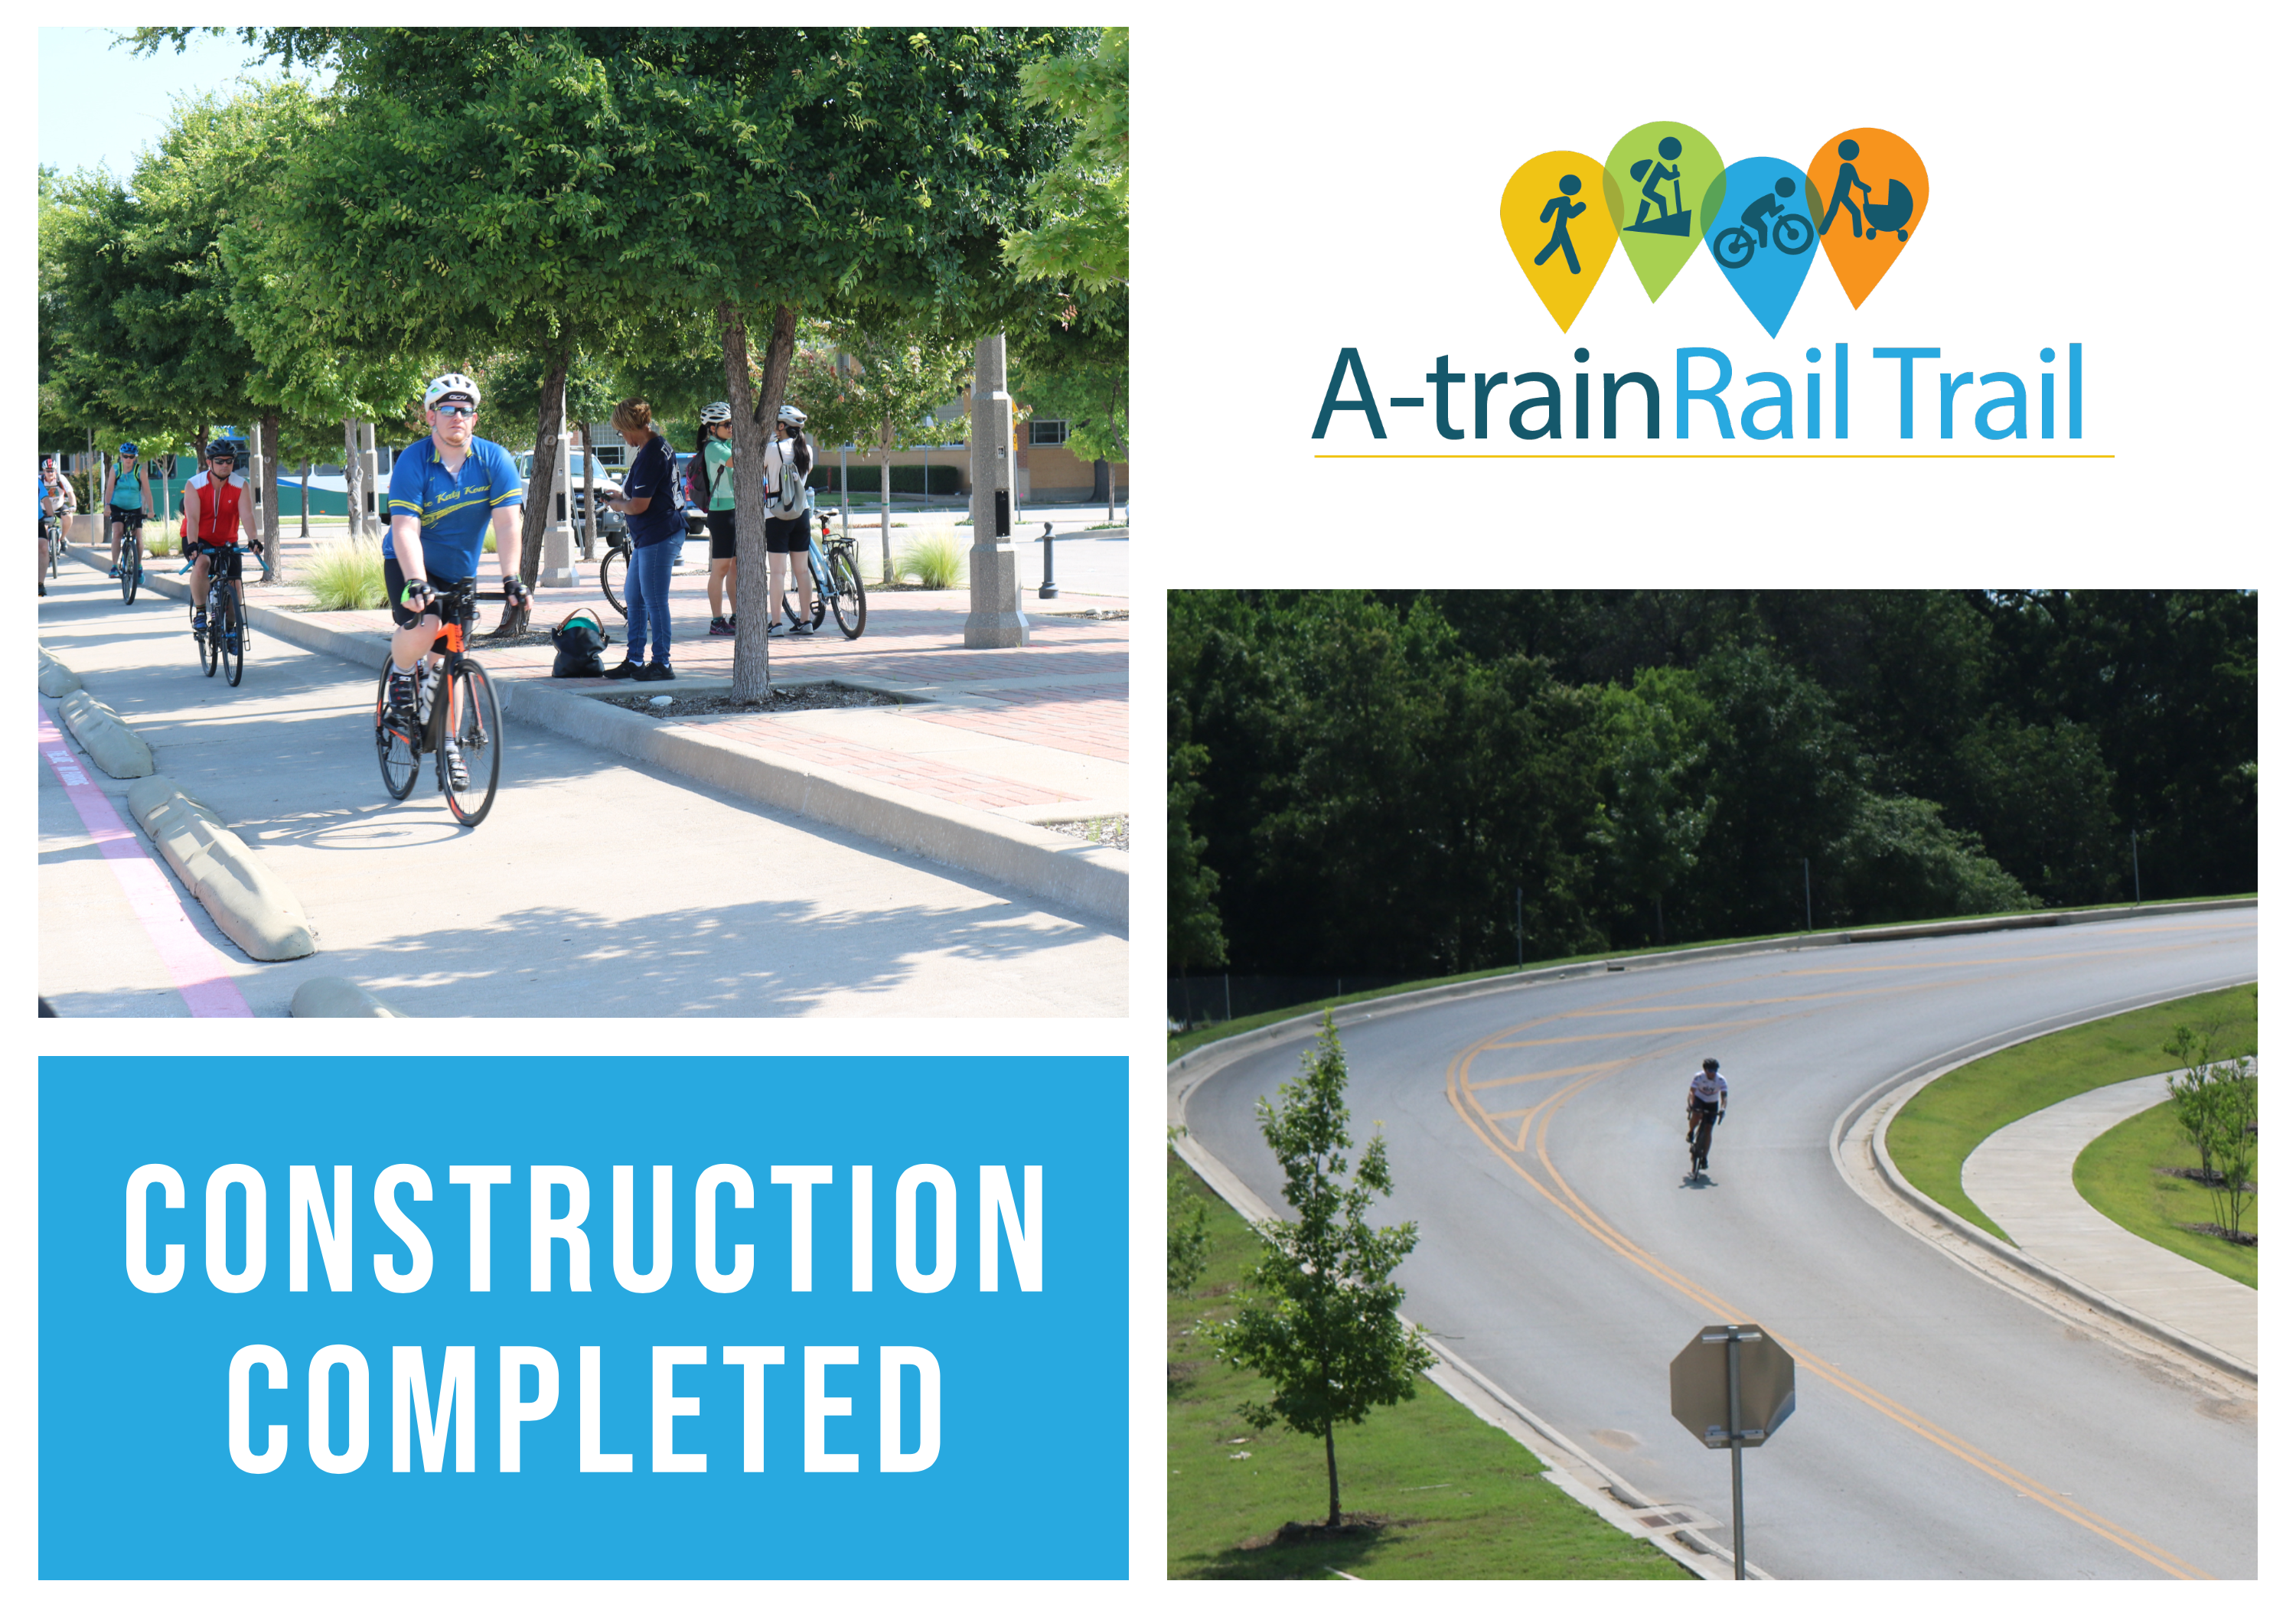 Photos of the A-train Rail Trail in a collage